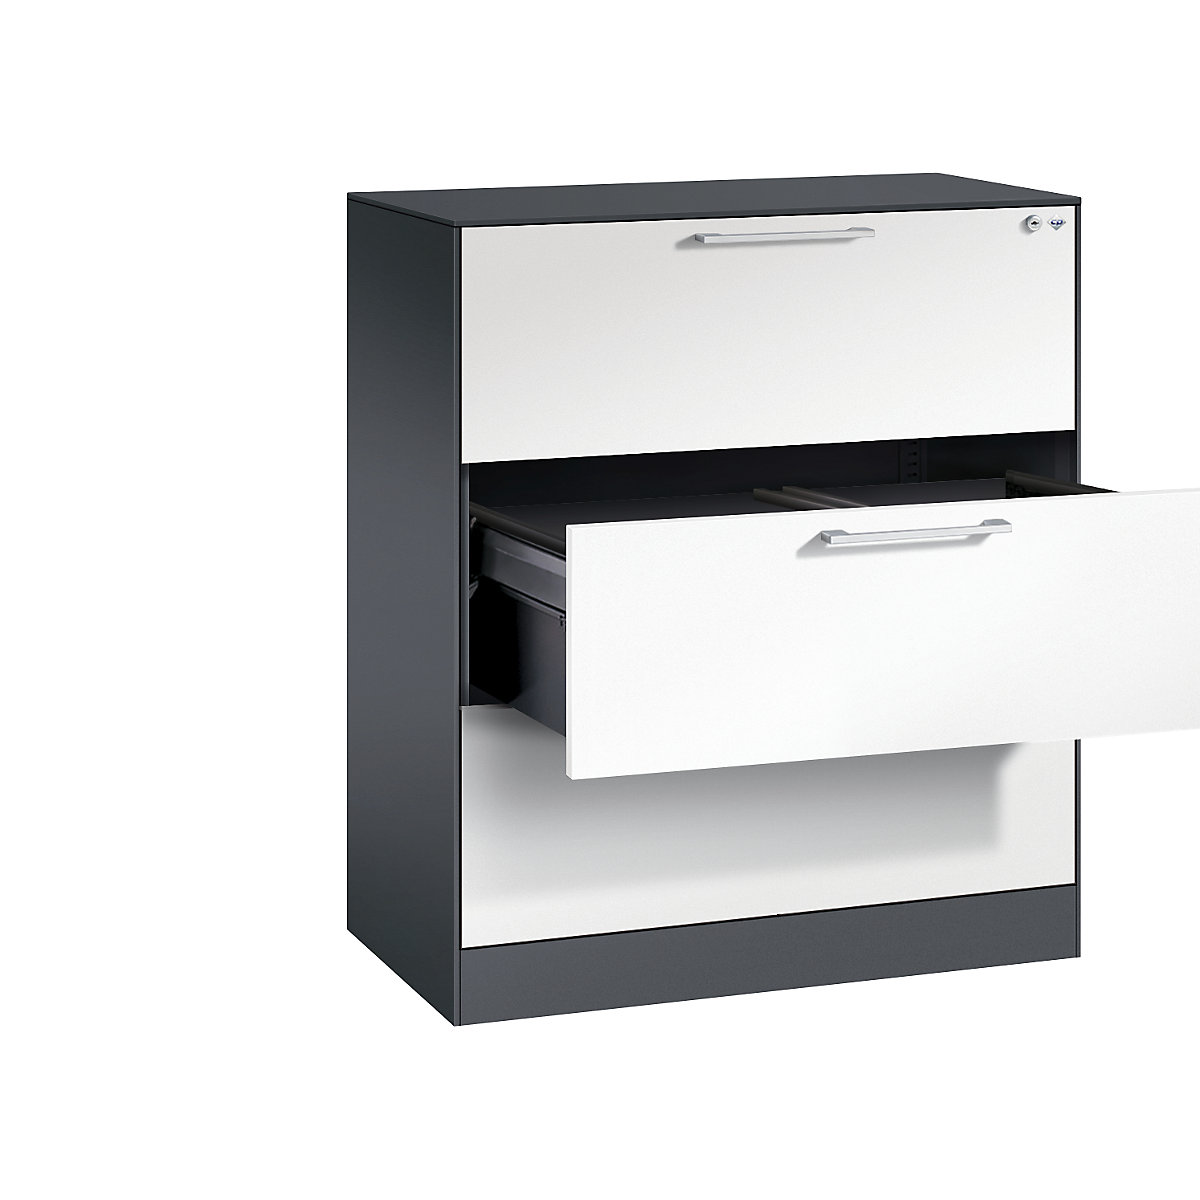 ASISTO suspension filing cabinet – C+P, width 800 mm, with 3 drawers, black grey/traffic white-18